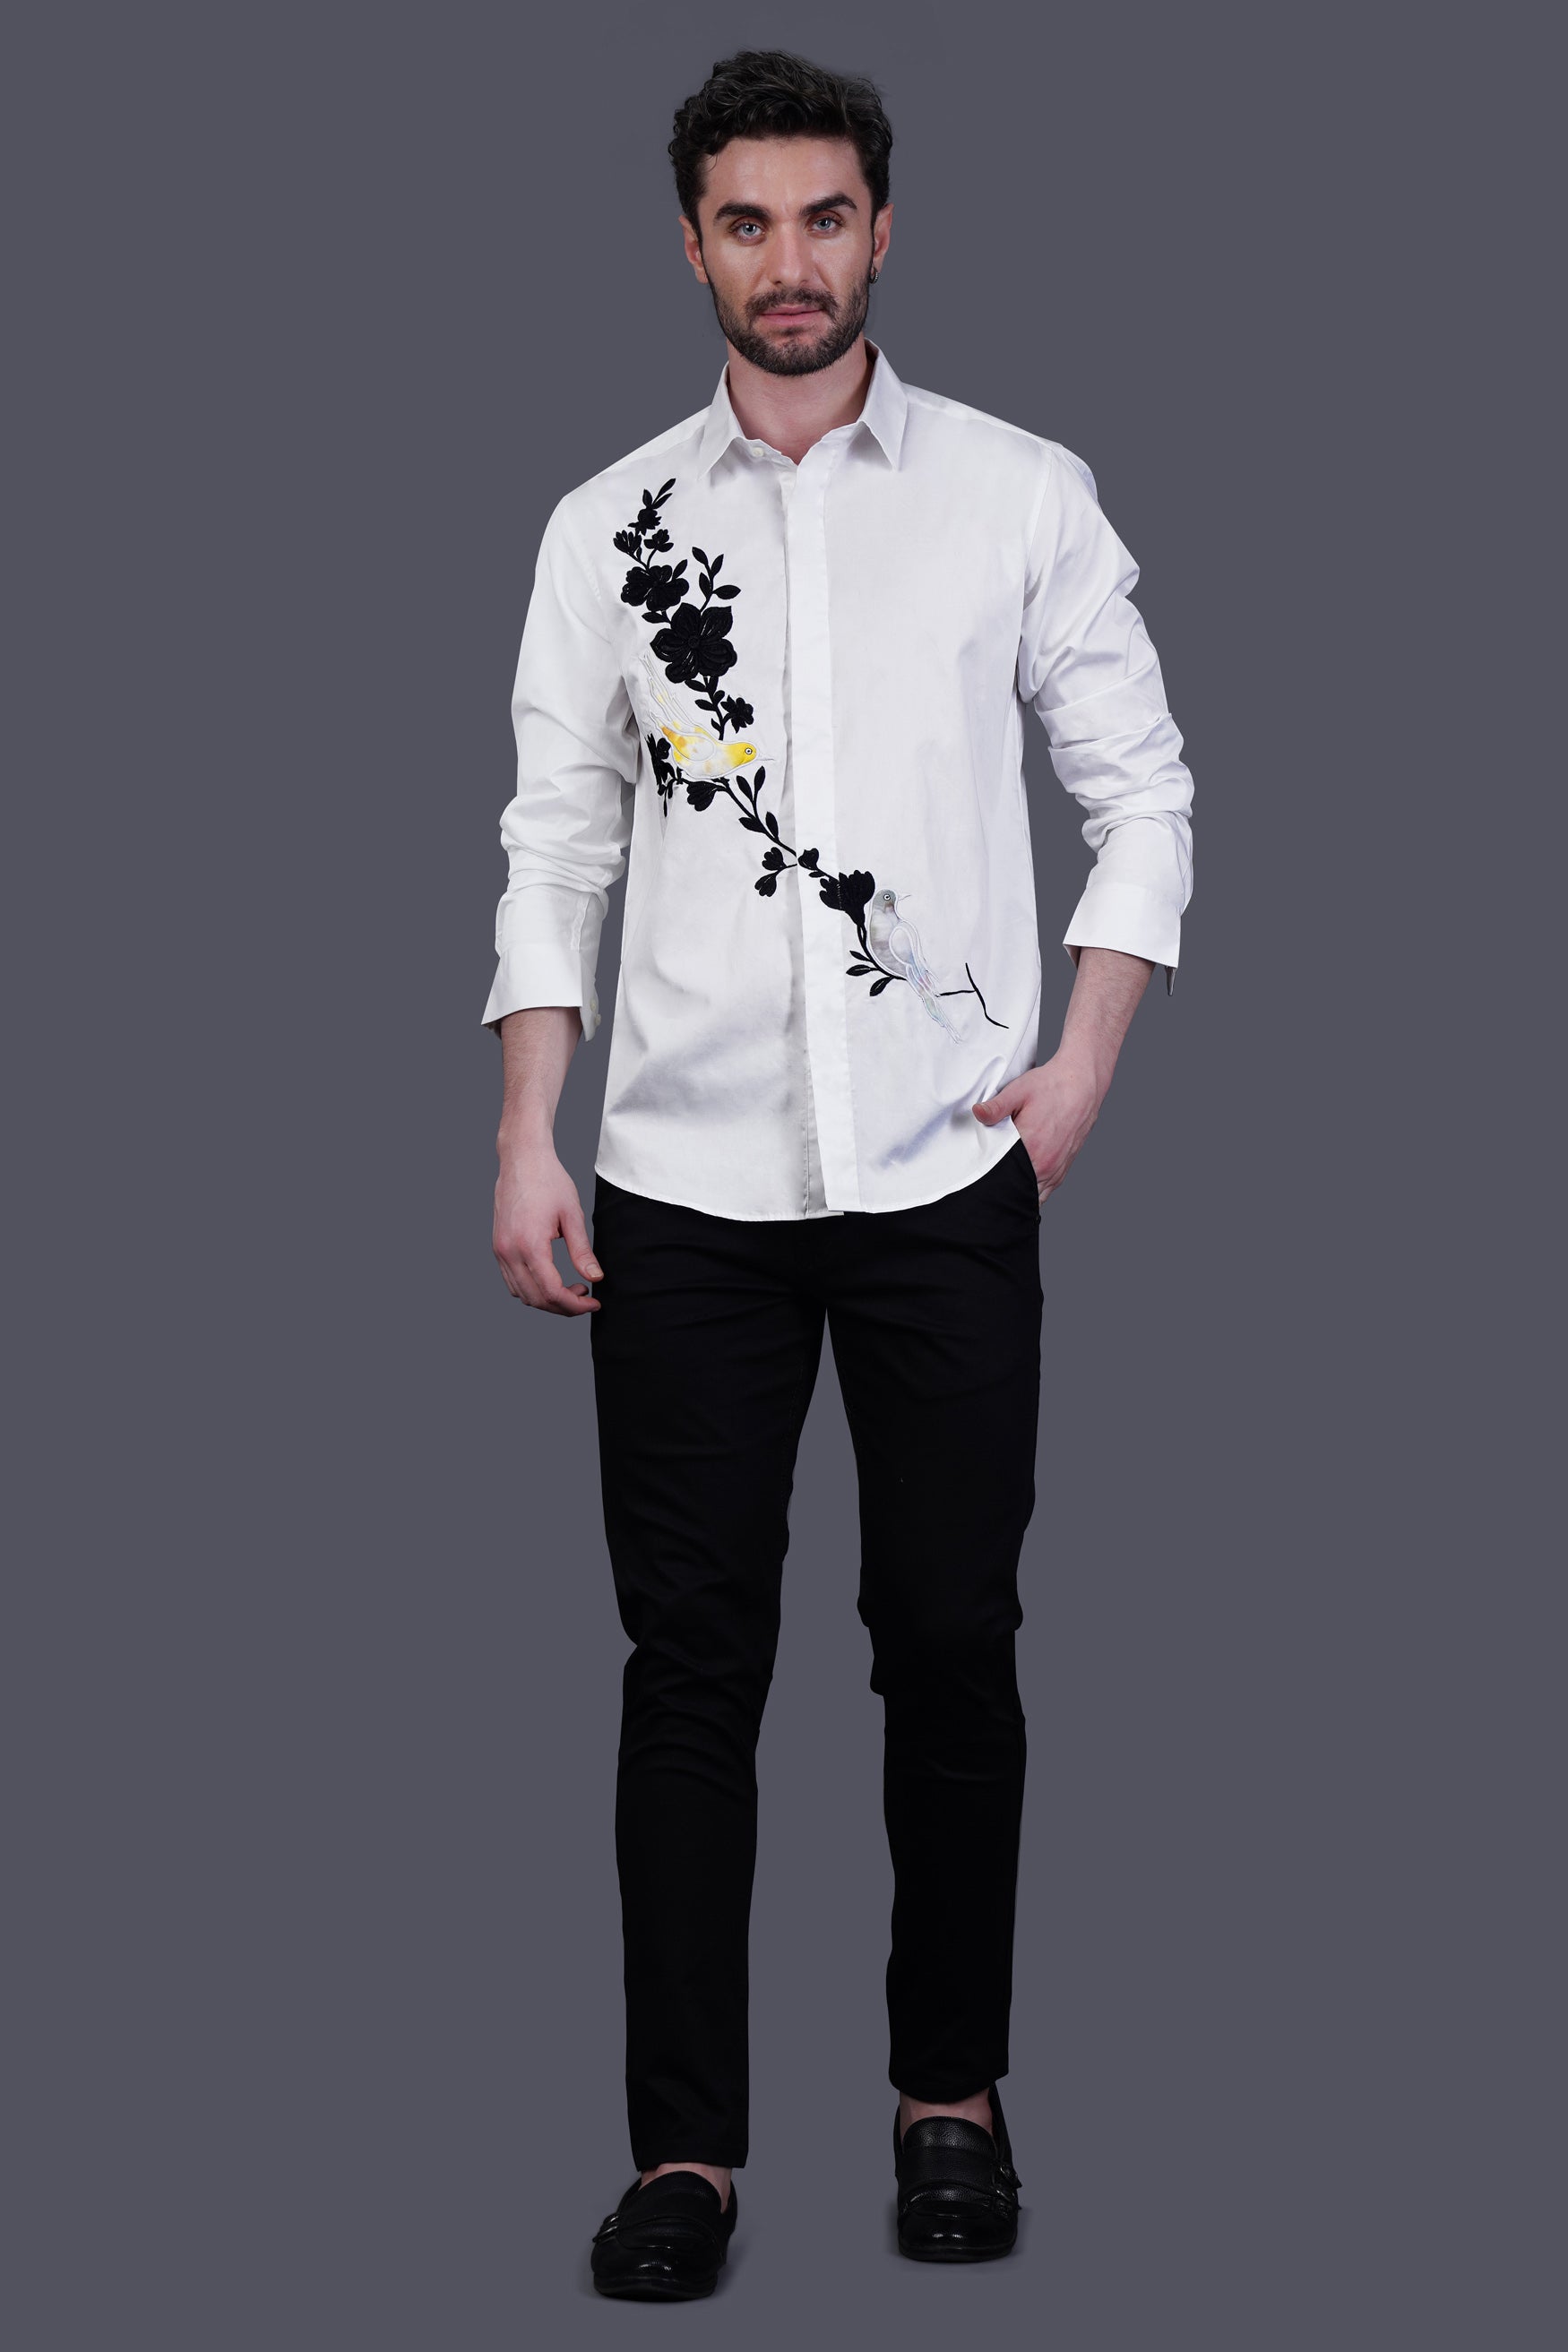 Bright White with Floral and Birds Embroidered Subtle Sheen Super Soft Premium Cotton Designer Shirt 11965-P782-NP-38, 11965-P782-NP-H-38, 11965-P782-NP-39, 11965-P782-NP-H-39, 11965-P782-NP-40, 11965-P782-NP-H-40, 11965-P782-NP-42, 11965-P782-NP-H-42, 11965-P782-NP-44, 11965-P782-NP-H-44, 11965-P782-NP-46, 11965-P782-NP-H-46, 11965-P782-NP-48, 11965-P782-NP-H-48, 11965-P782-NP-50, 11965-P782-NP-H-50, 11965-P782-NP-52, 11965-P782-NP-H-52